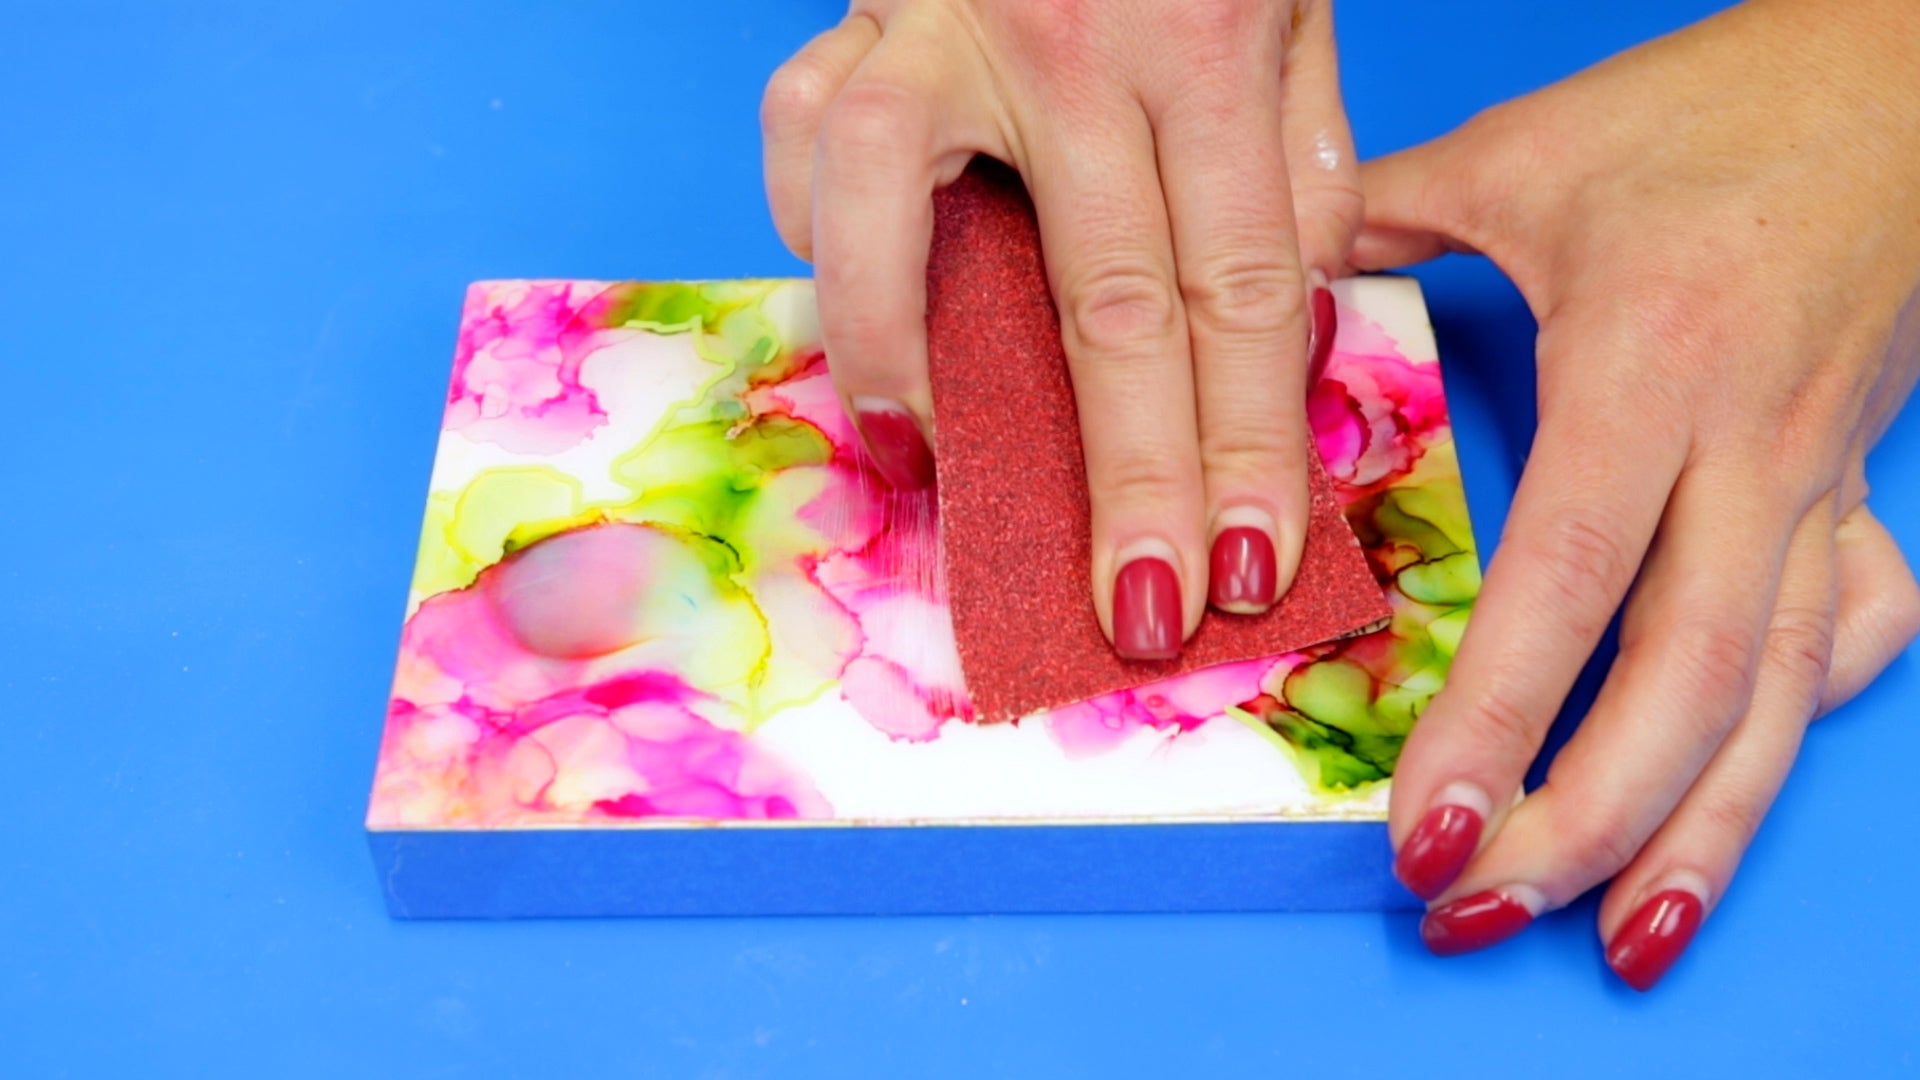 use coarse 80 grit sandpaper to rough up resin before pouring a second layer